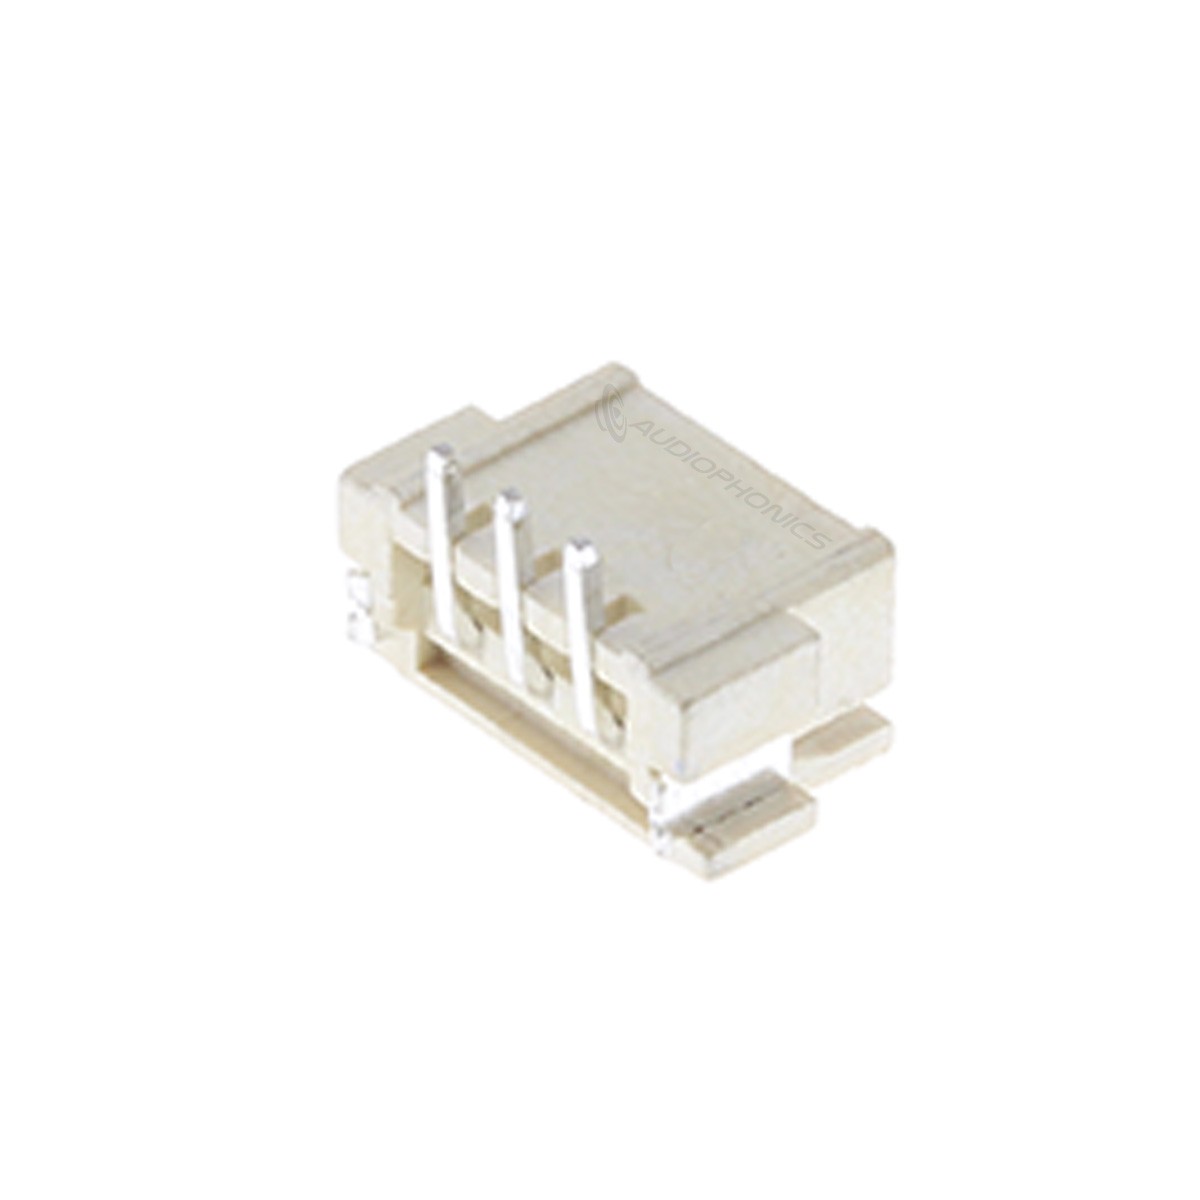 XH 2.54mm Male 3 Pin Angled Socket Connector White (Unit)